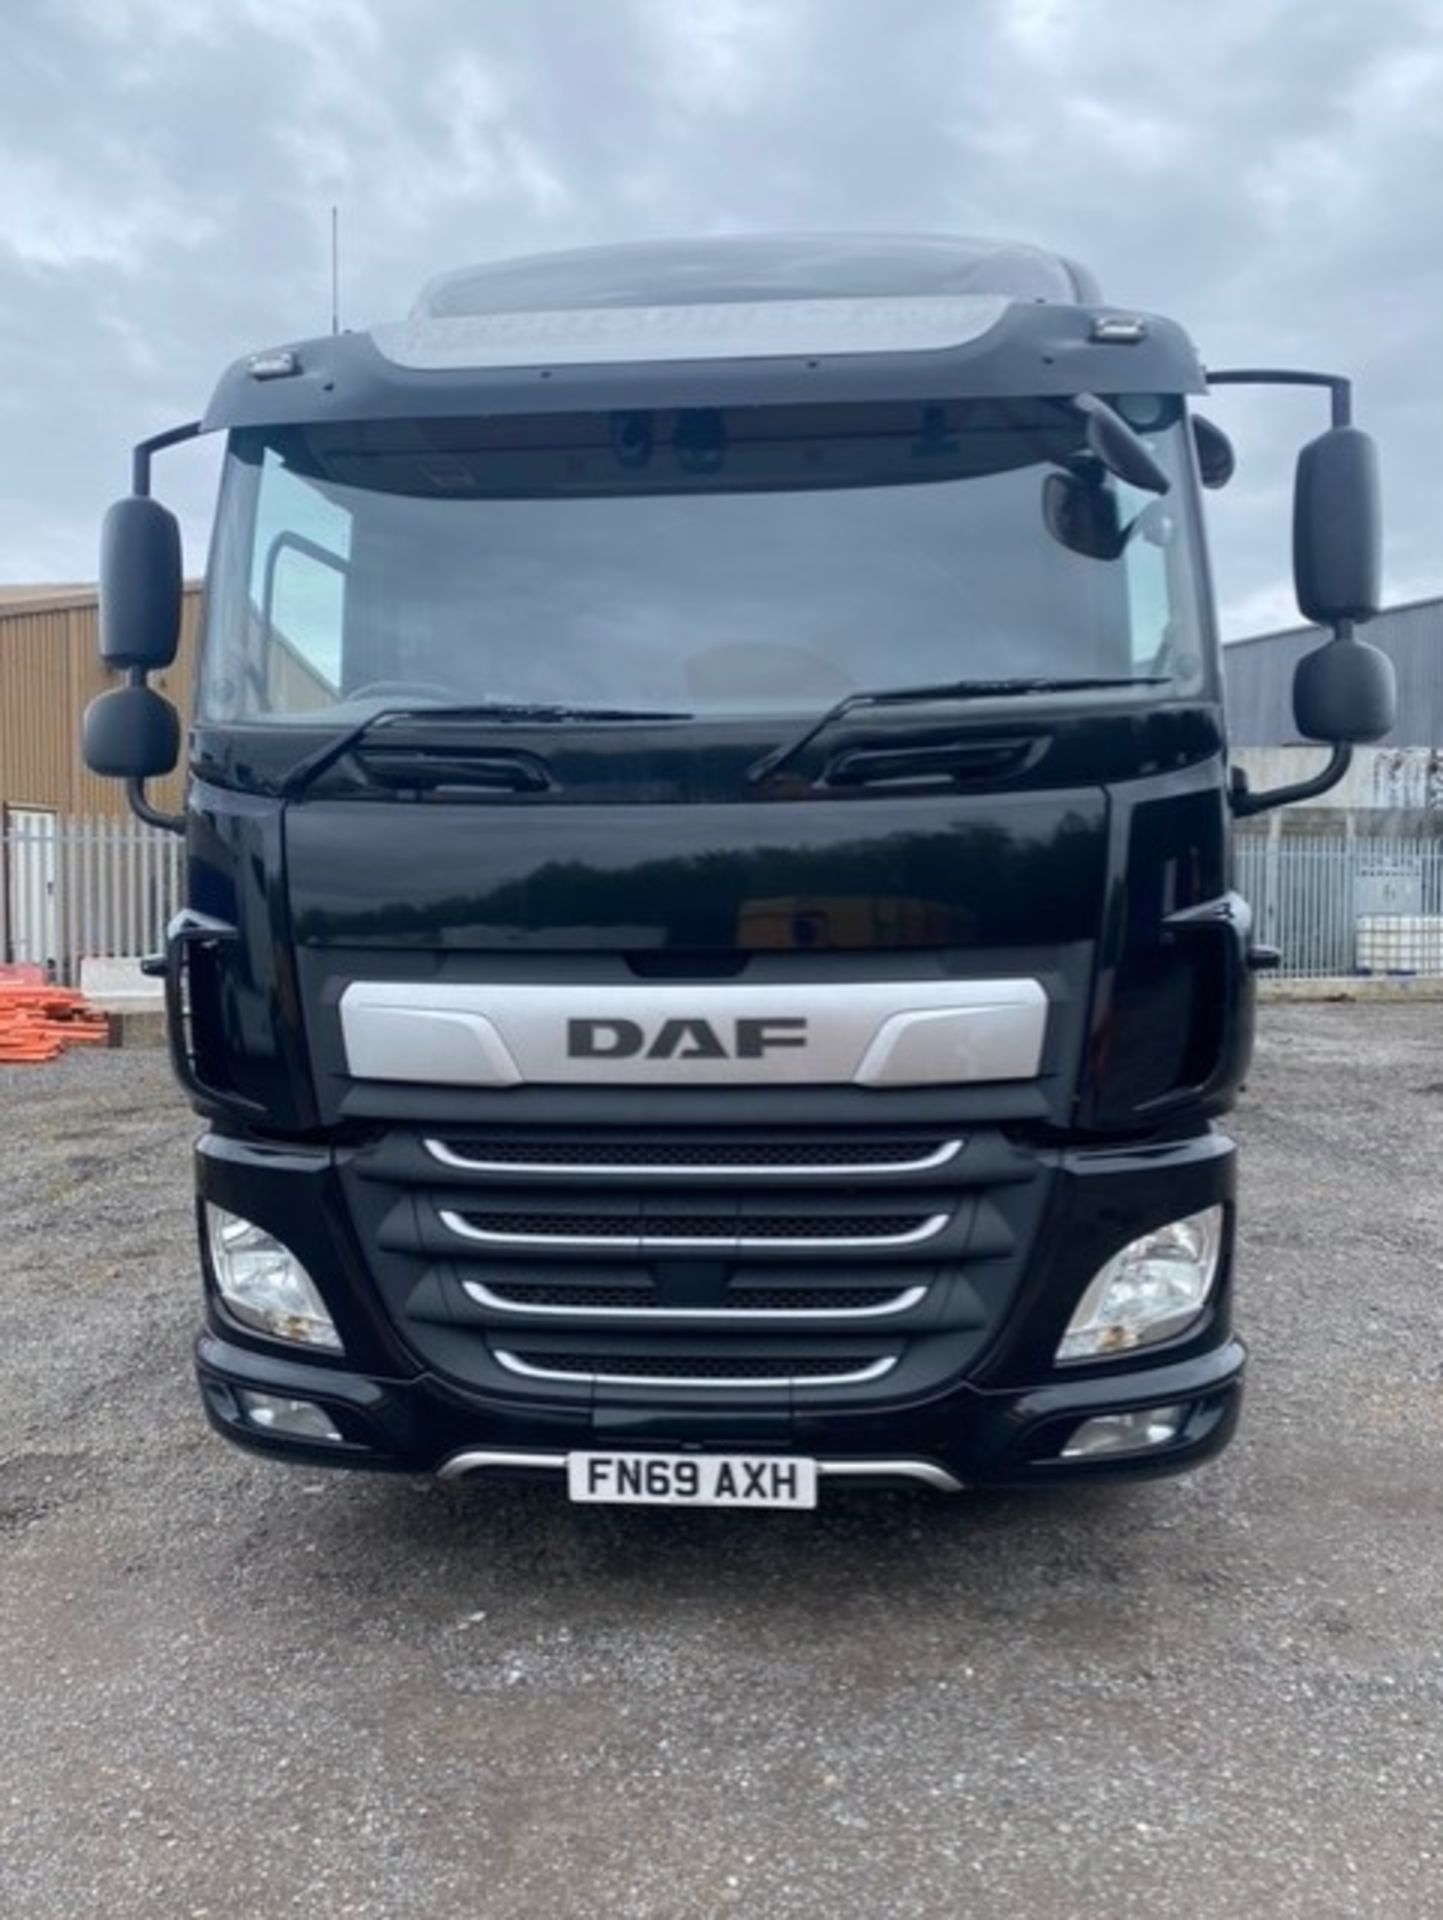 2019, DAF CF 260 FA (Ex-Fleet Owned & Maintained) - FN69 AXH (18 Ton Rigid Truck with Tail Lift) - Image 18 of 22